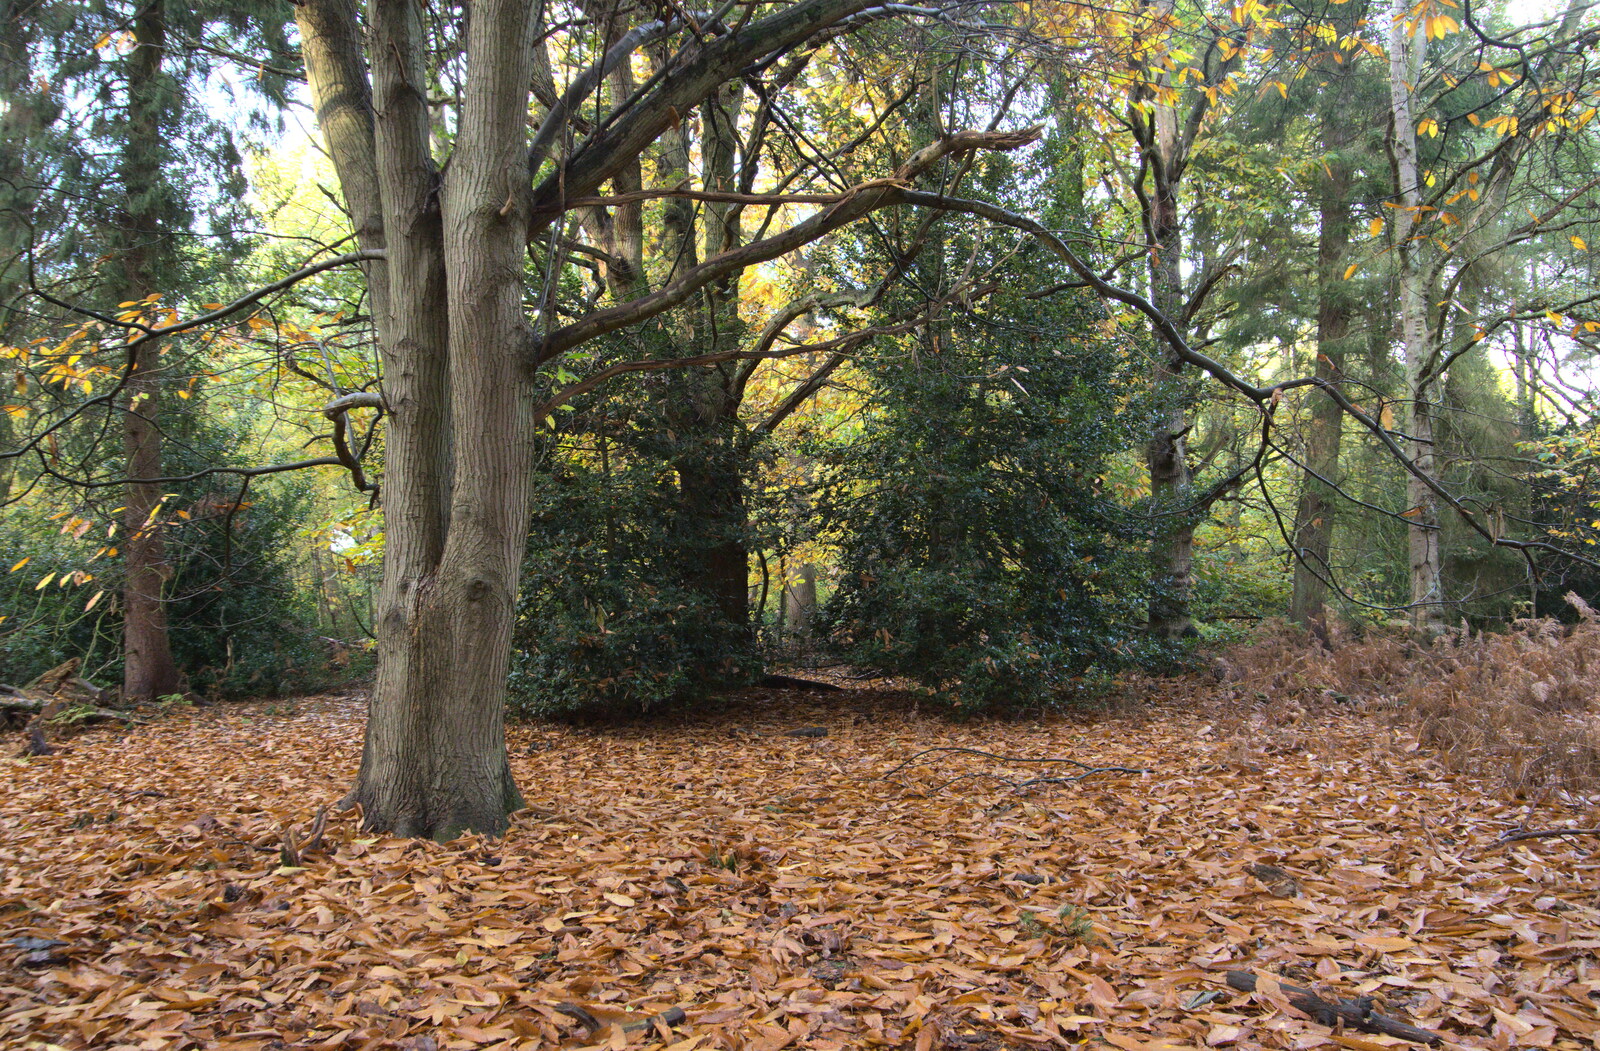 A carpet of beach leaves from A Trip to Sandringham Estate, Norfolk - 31st October 2020